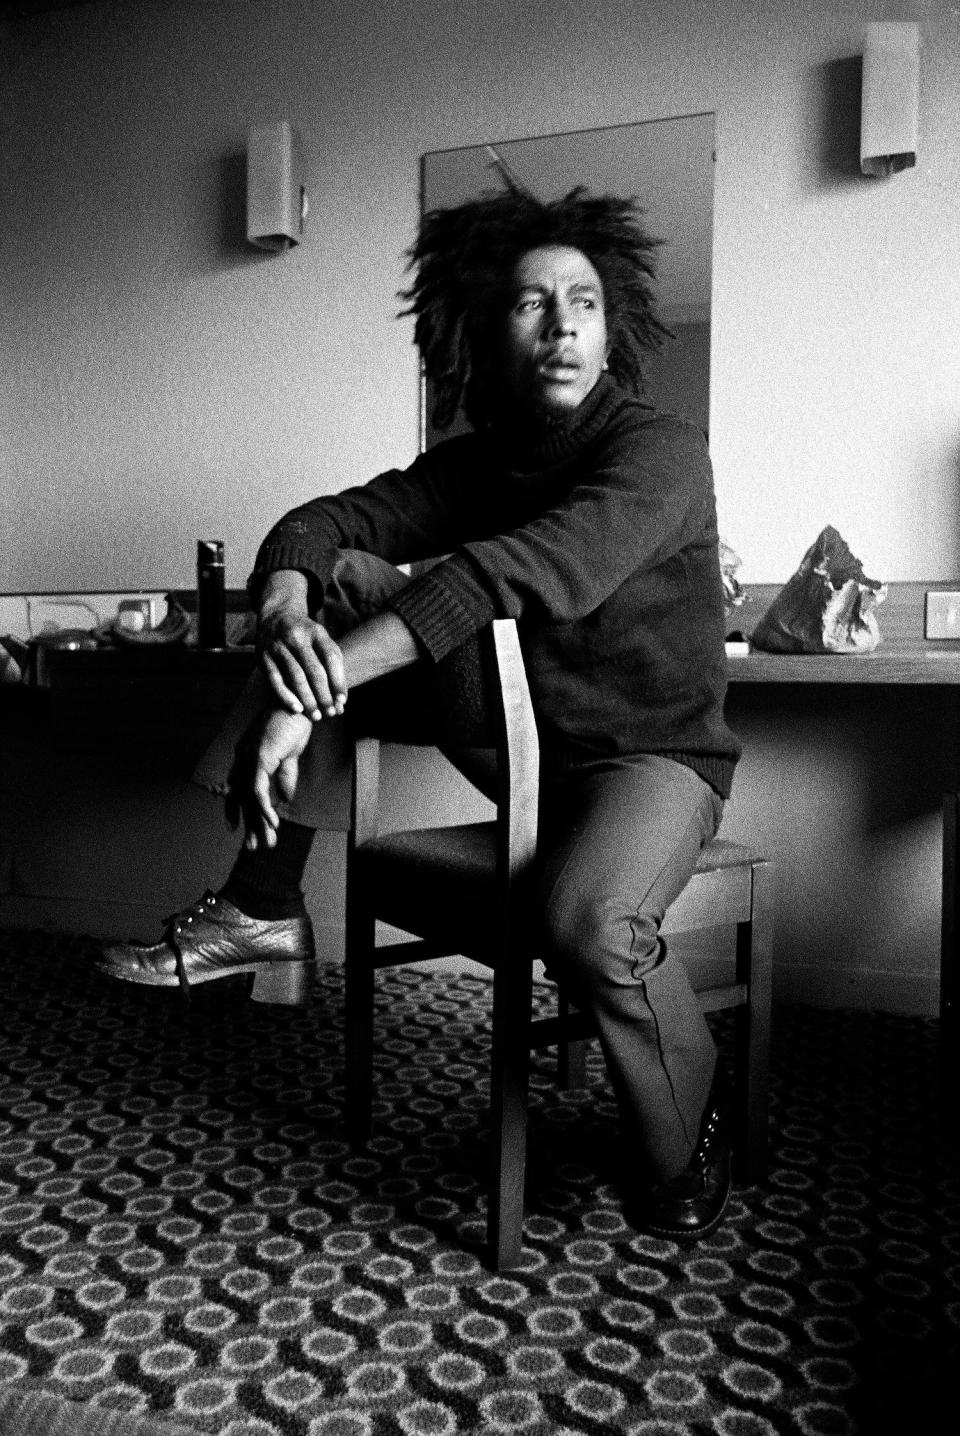 A photo of Bob Marley in a scene from the documentary motion picture "Marley." Photo Magnolia Pictures.